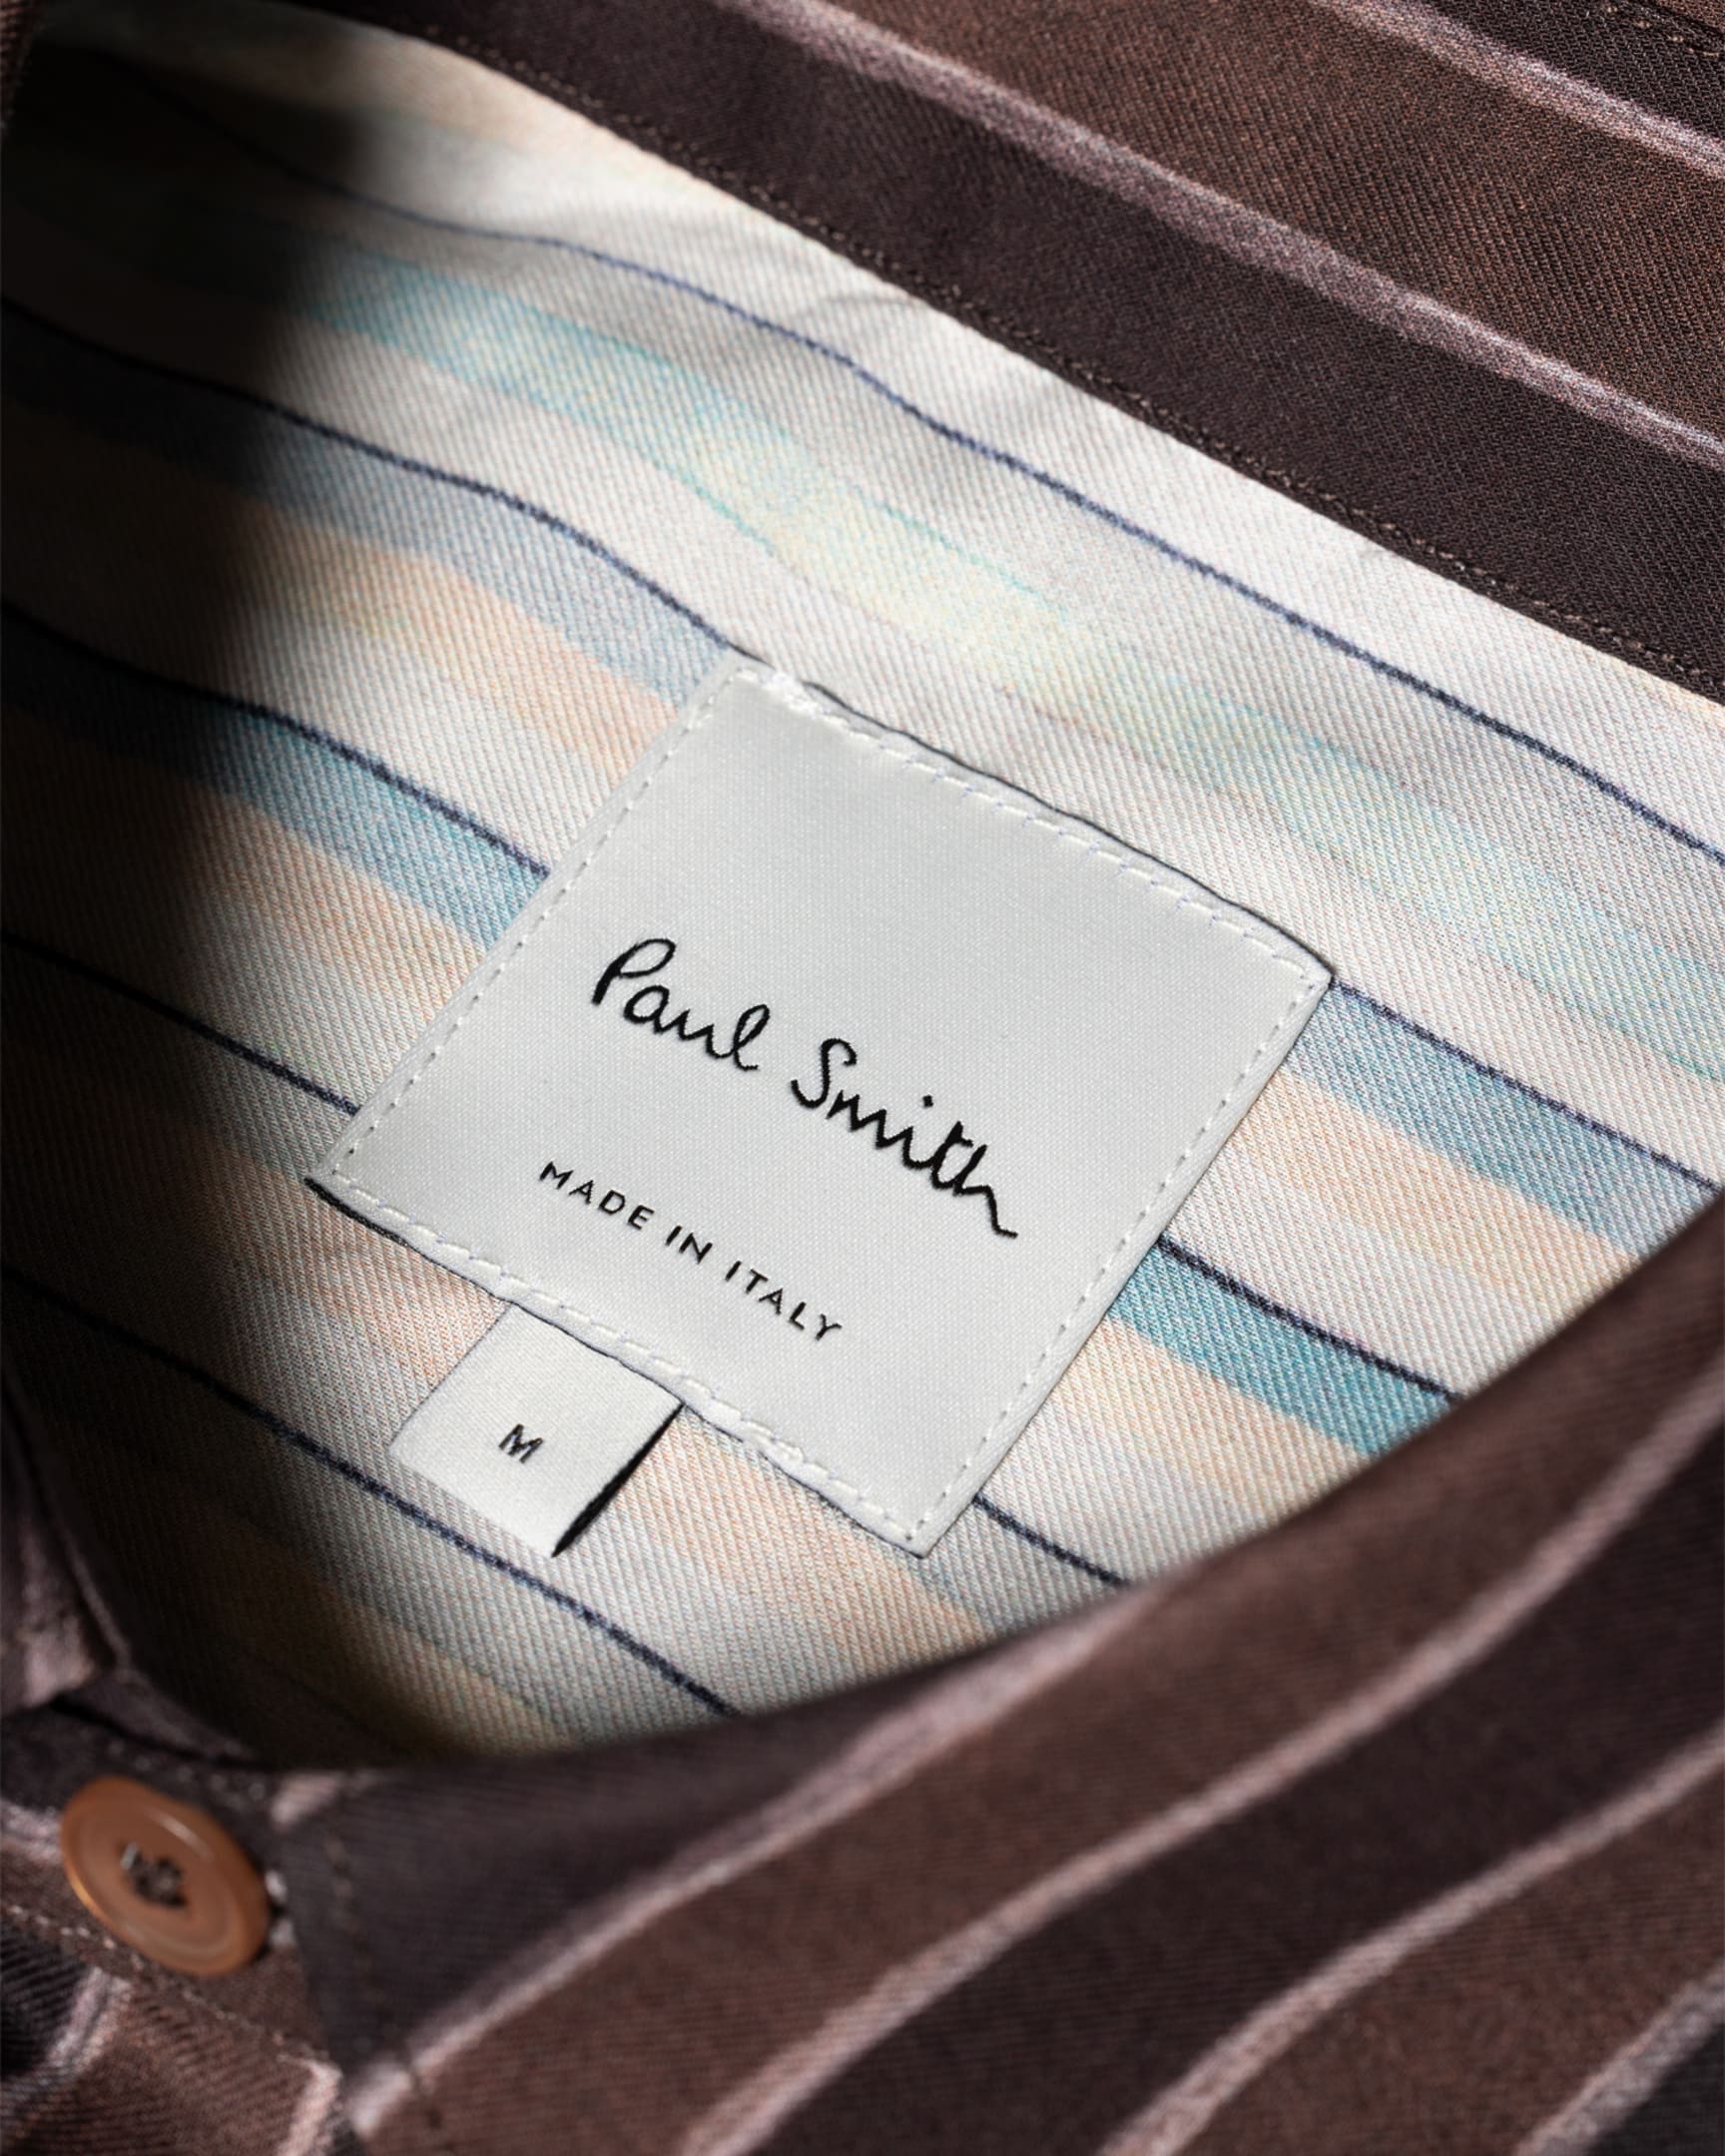 Detail View - Brown Cotton 'Painted Stripe' Shirt Paul Smith